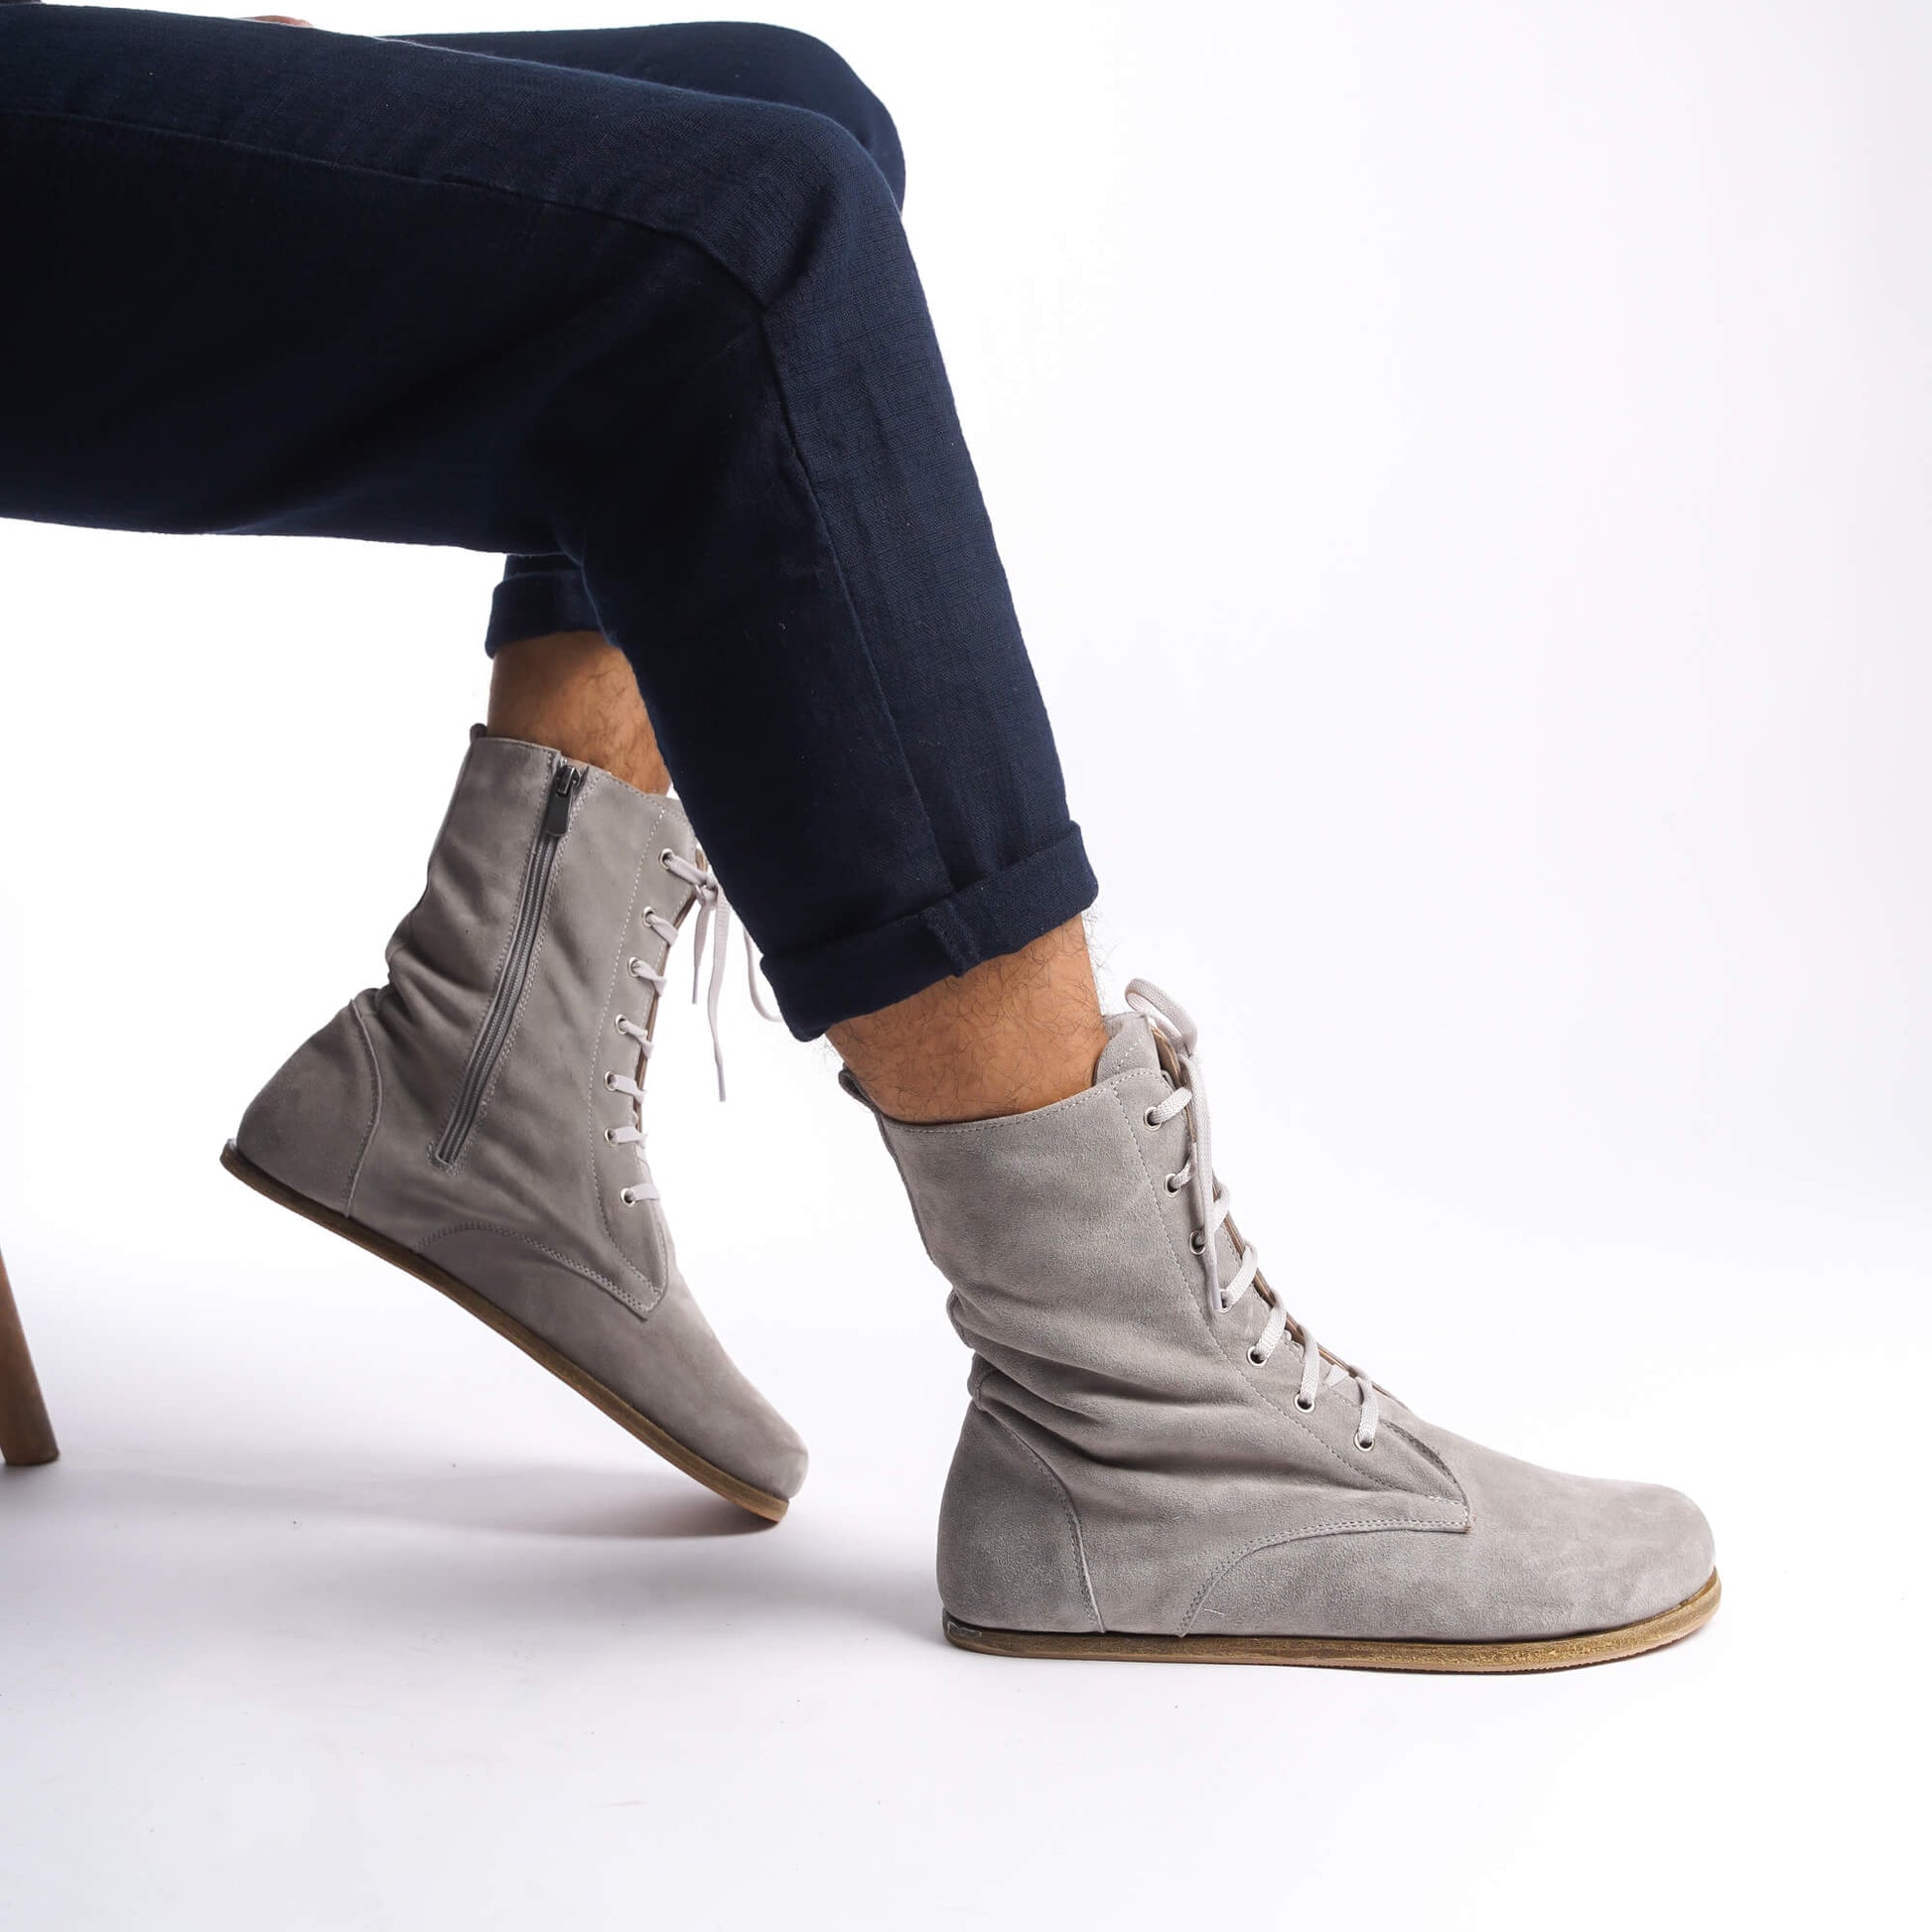 Men's gray genuine leather barefoot winter boots, designed with laces and a side zipper for comfort.